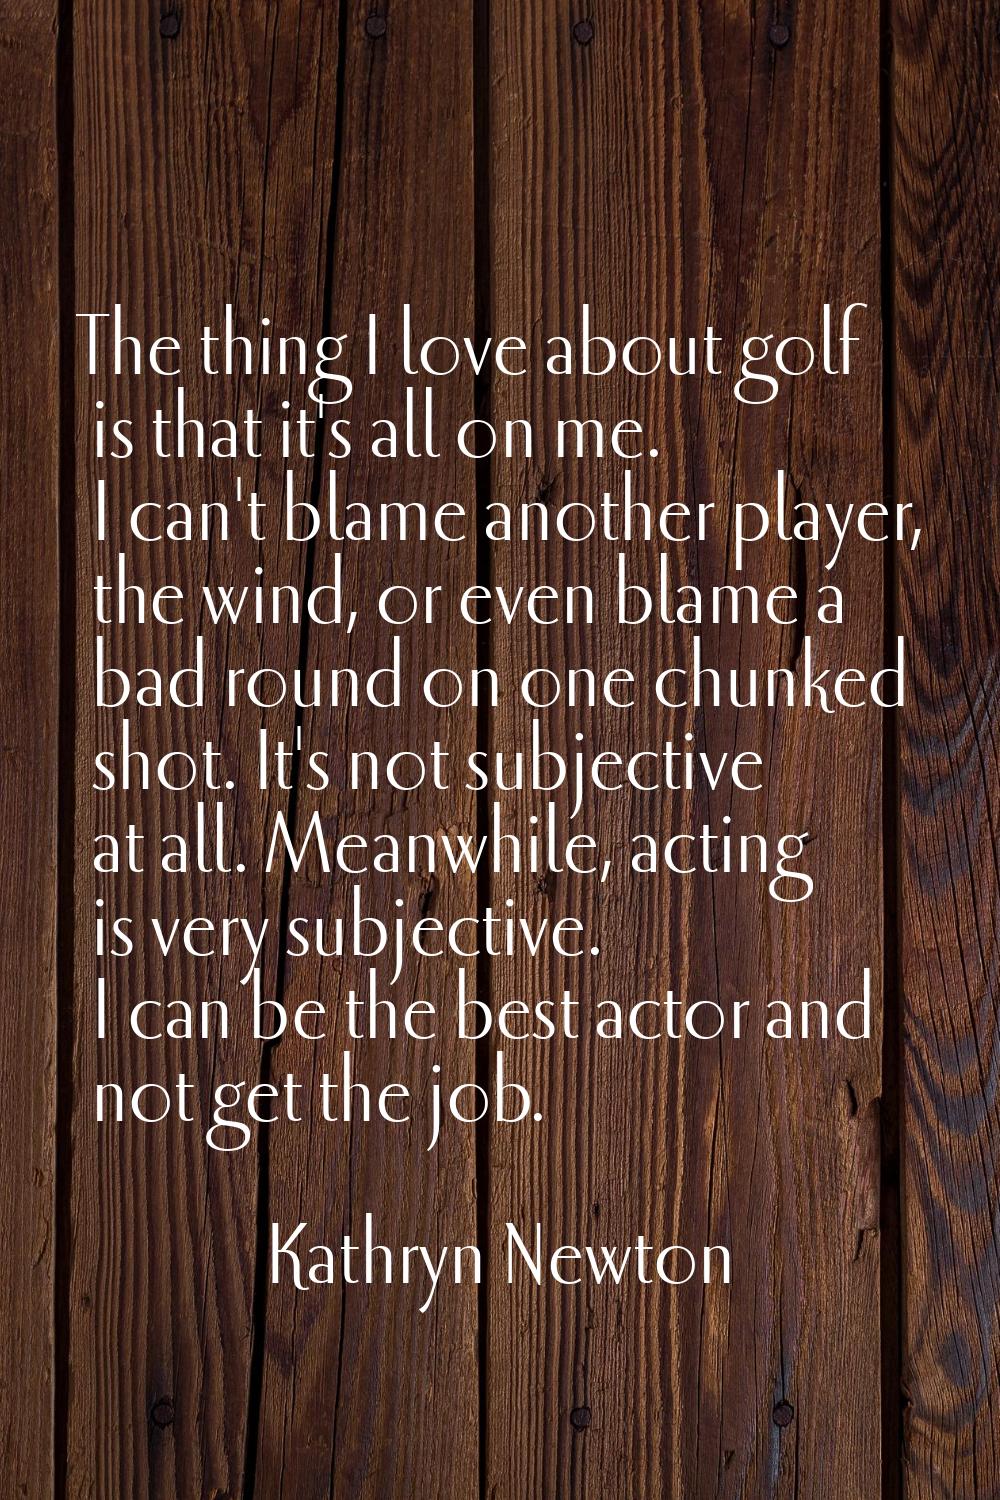 The thing I love about golf is that it's all on me. I can't blame another player, the wind, or even